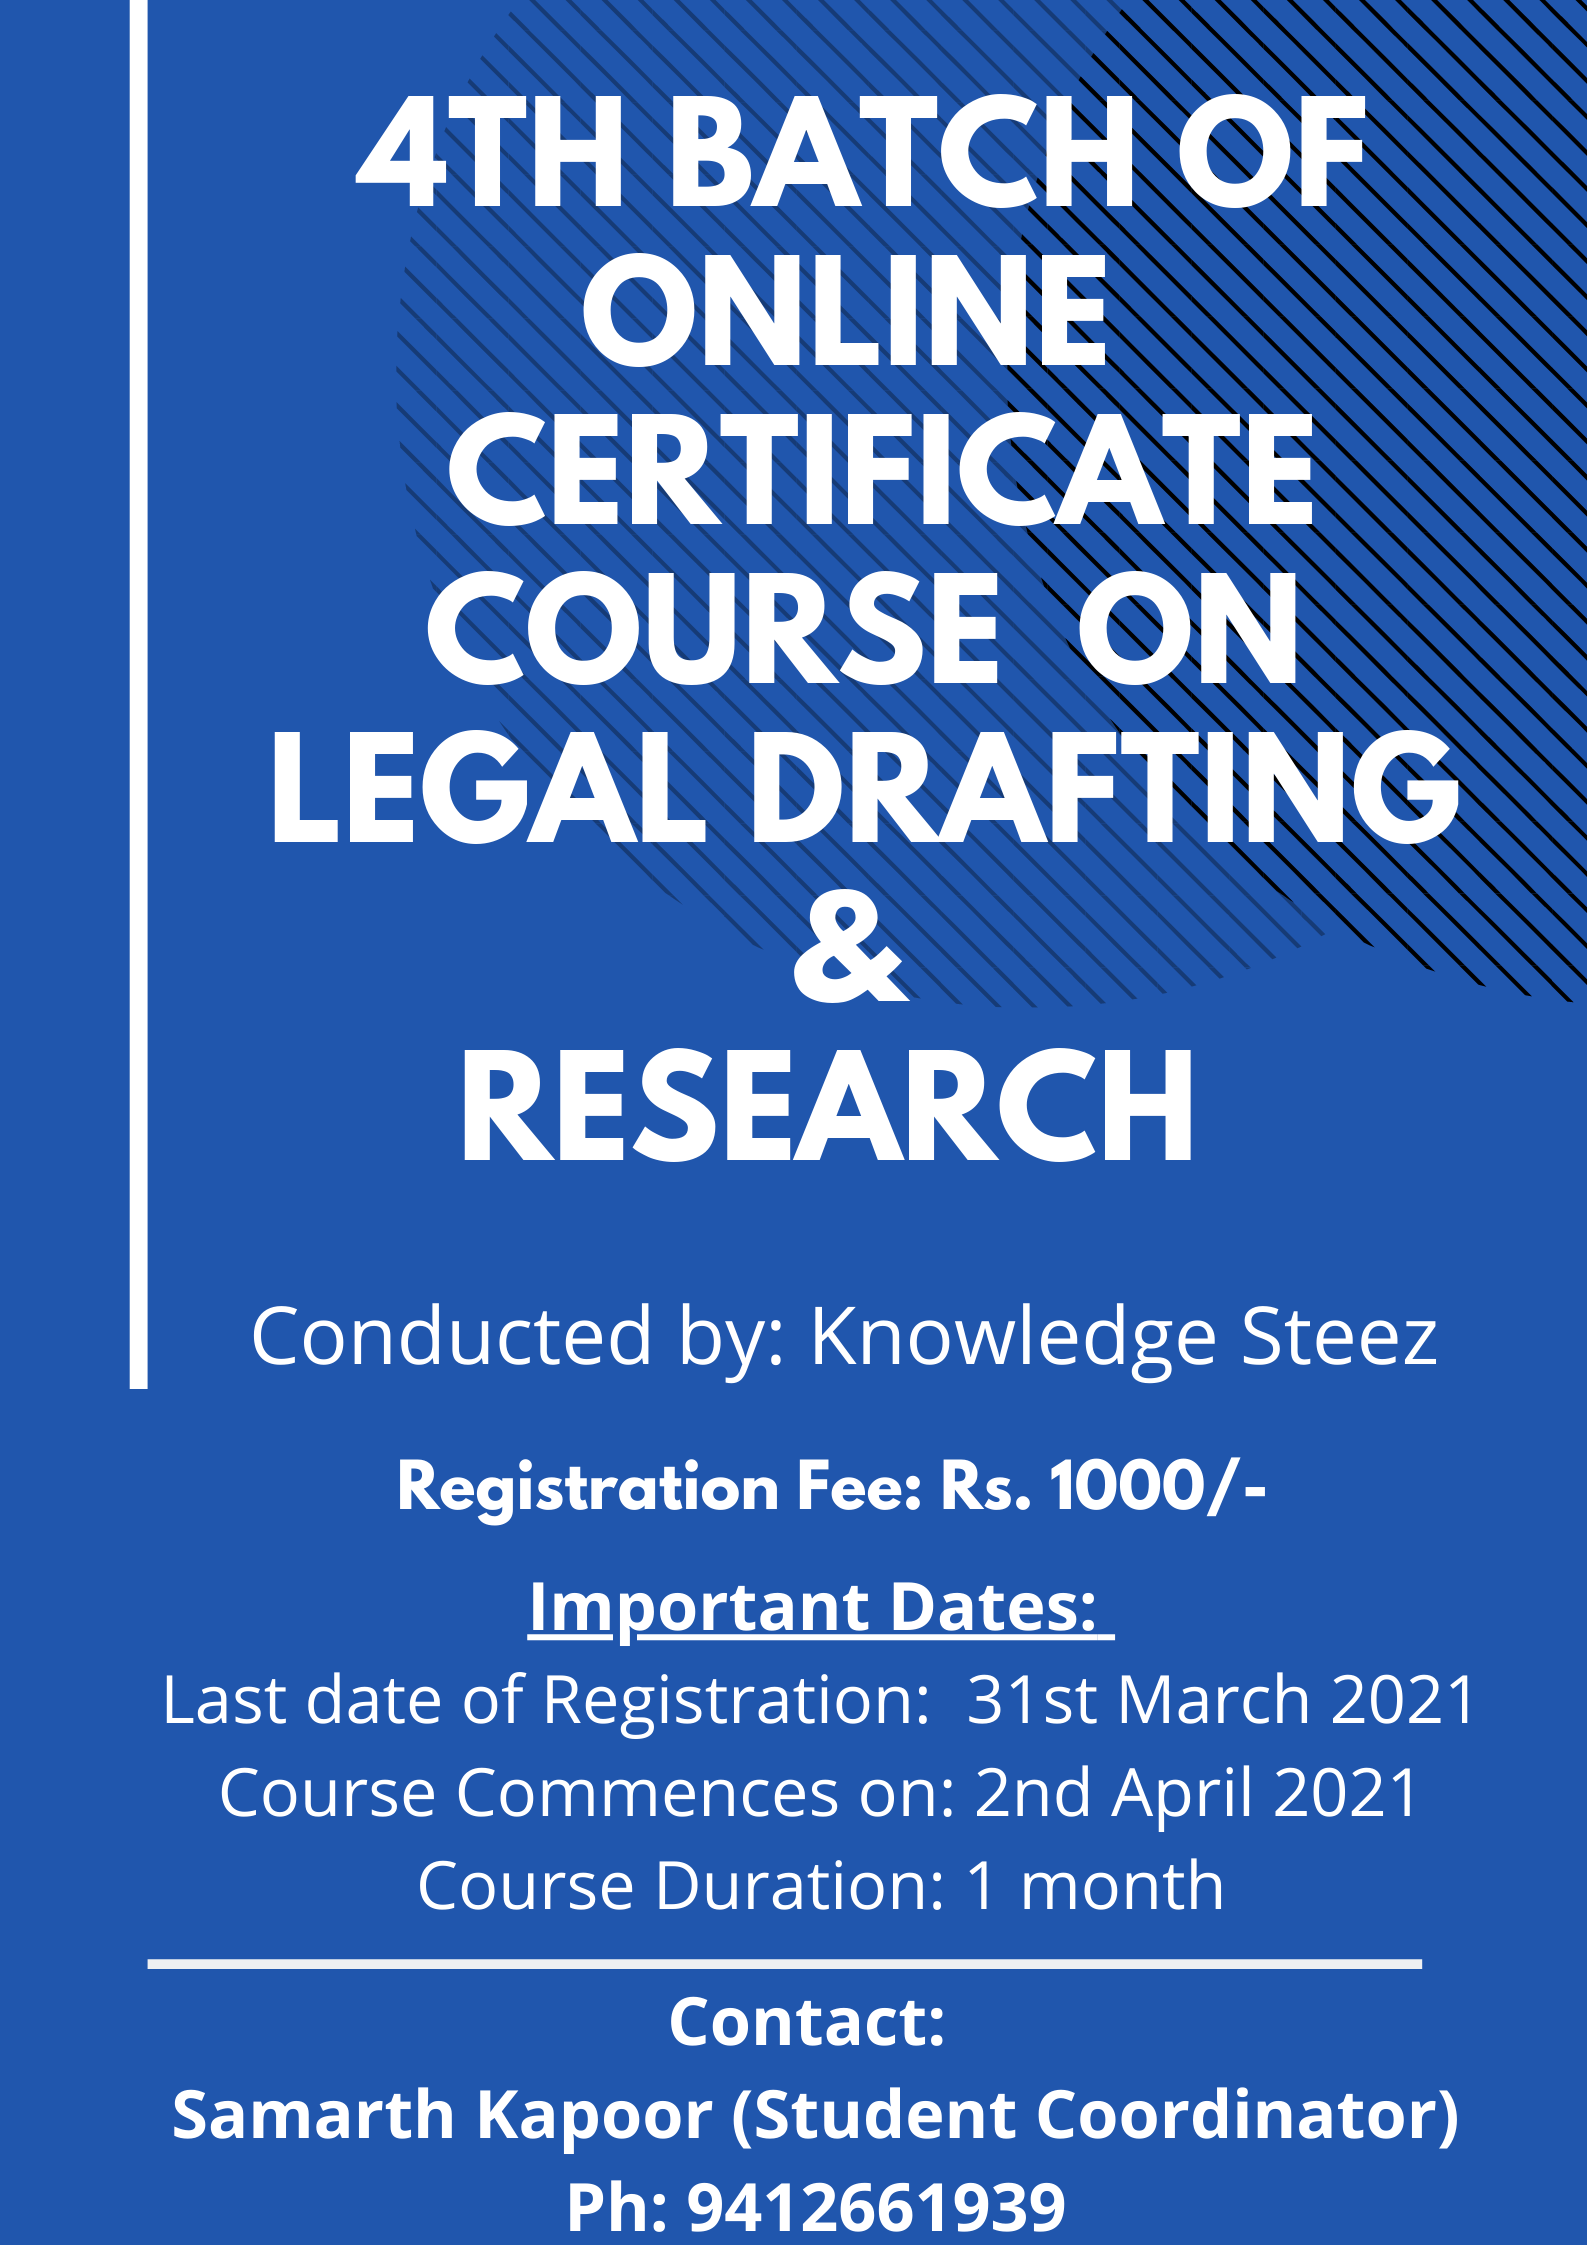 Certificate Course on Legal Drafting by Knowledge Steez EduHub LLP (Register by 15th April 2021)